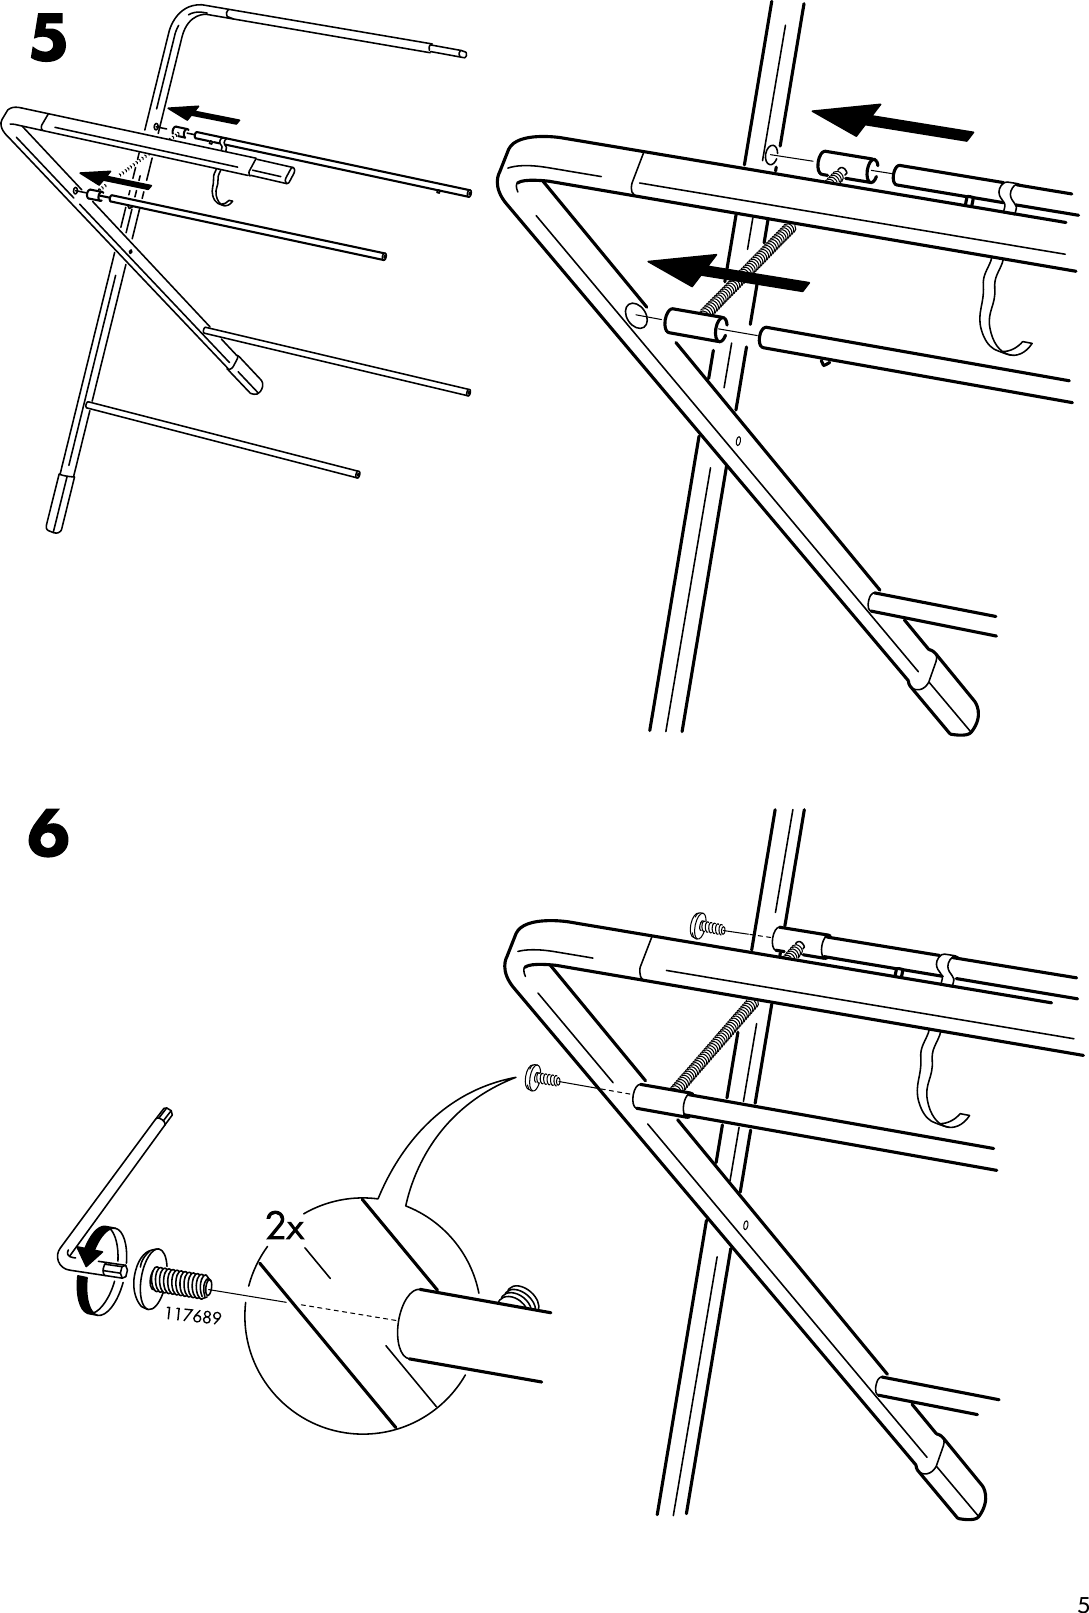 Page 5 of 12 - Ikea Ikea-Spoling-Changing-Table-Assembly-Instruction